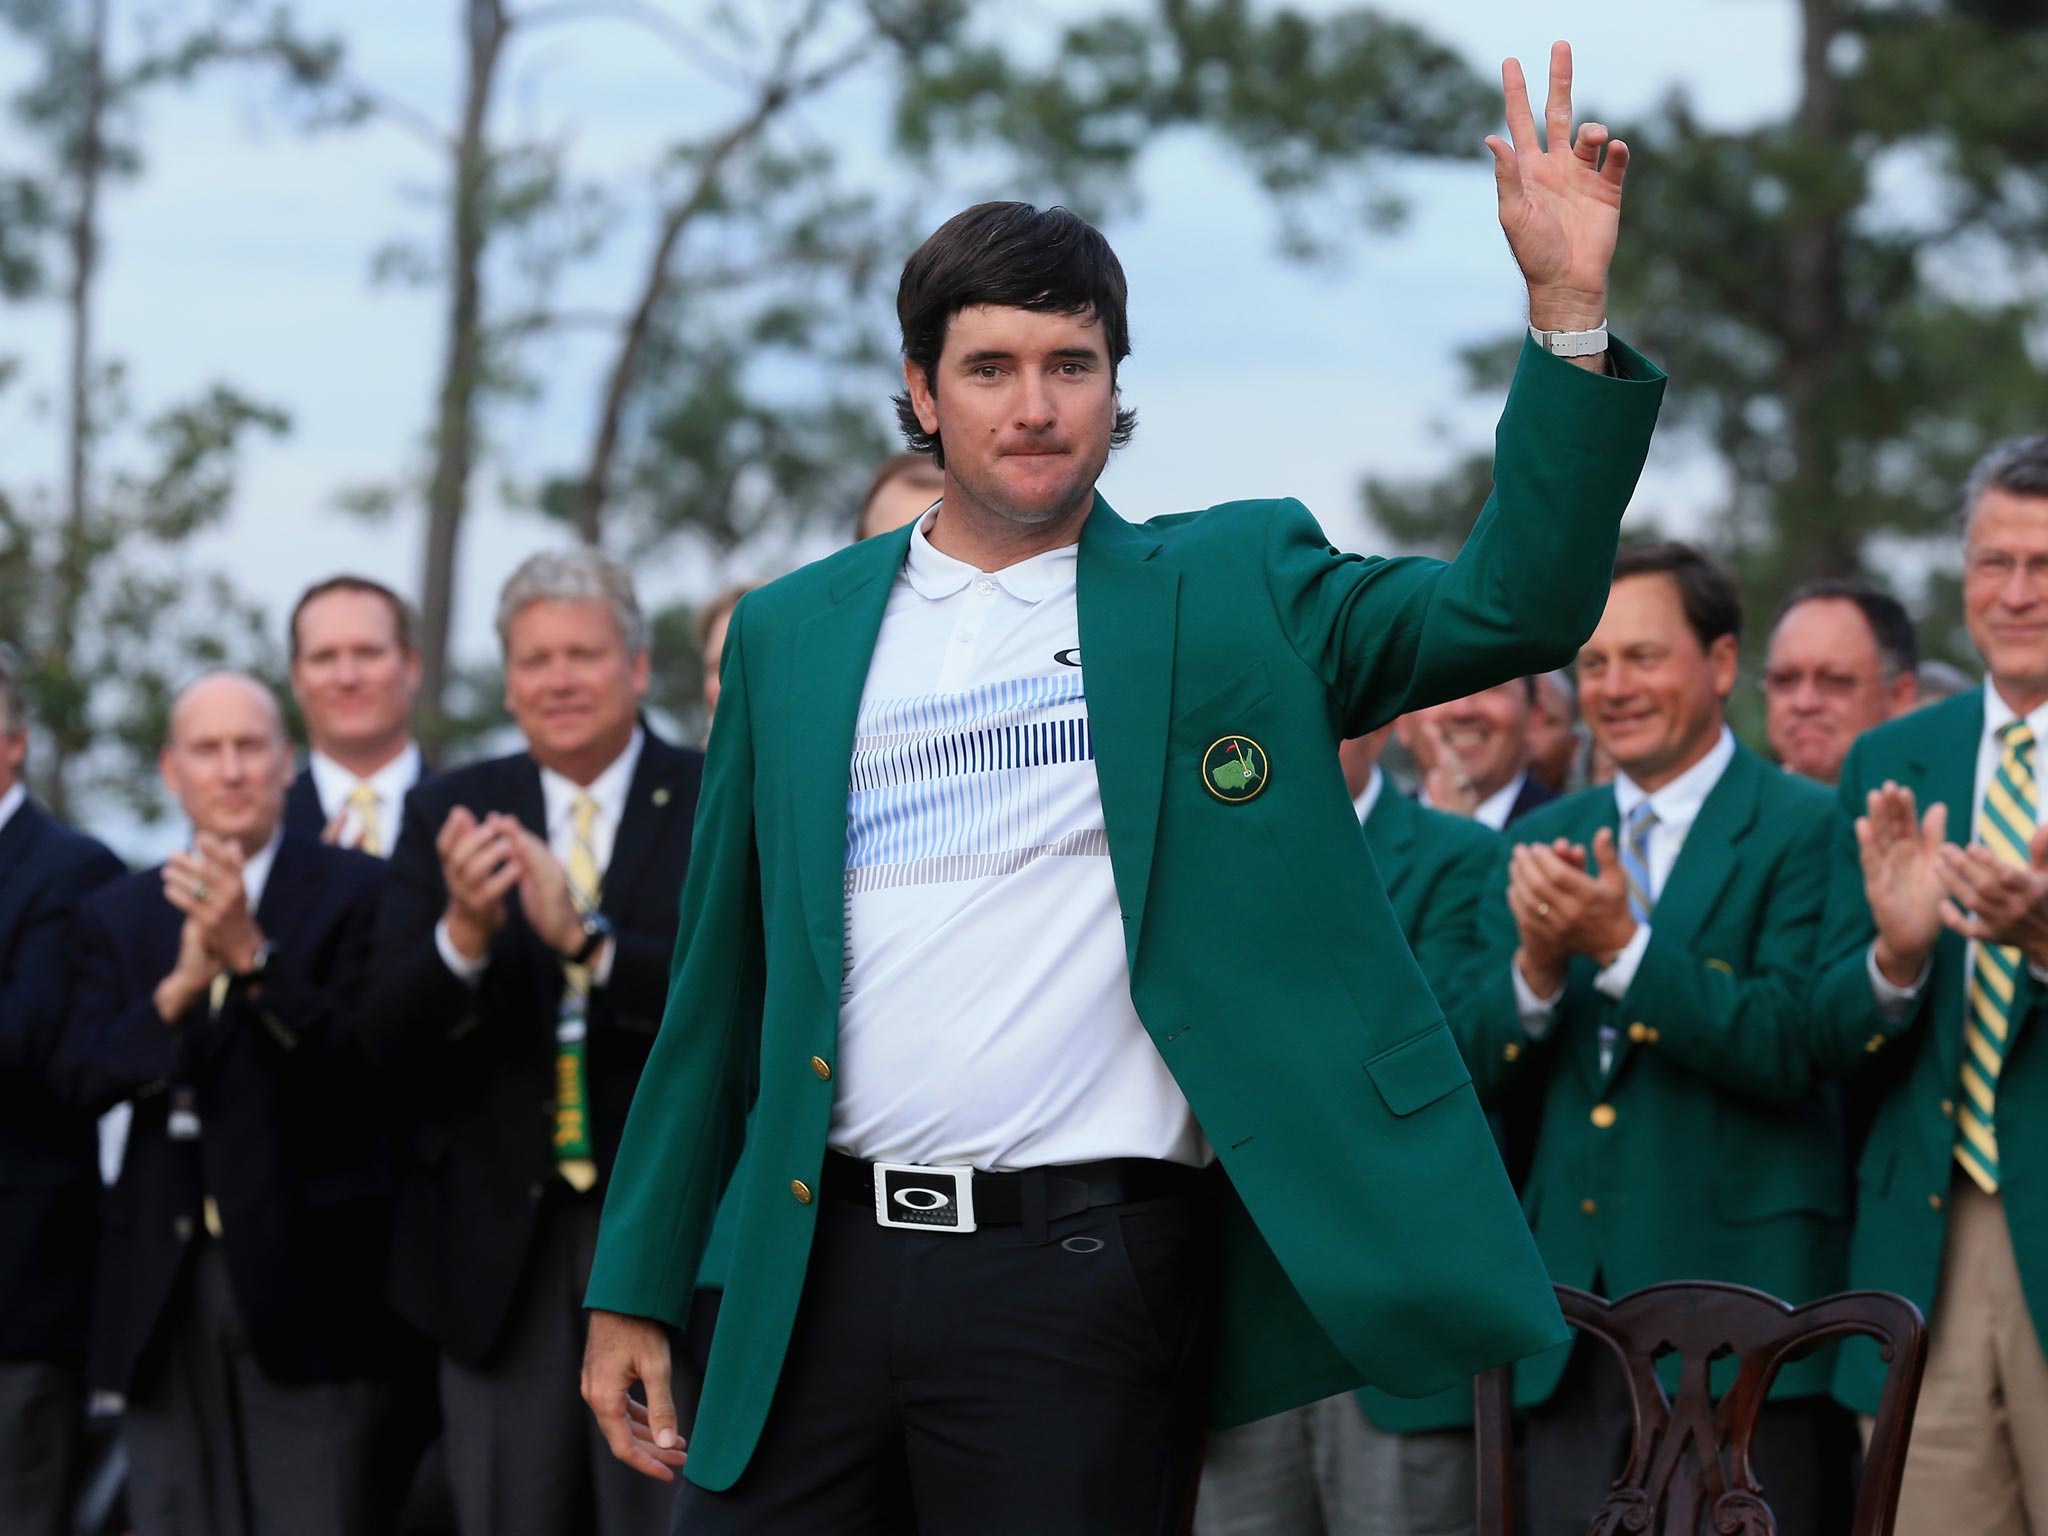 Bubba Watson soaks up the applause at the Augsta National course after his 2014 Masters success